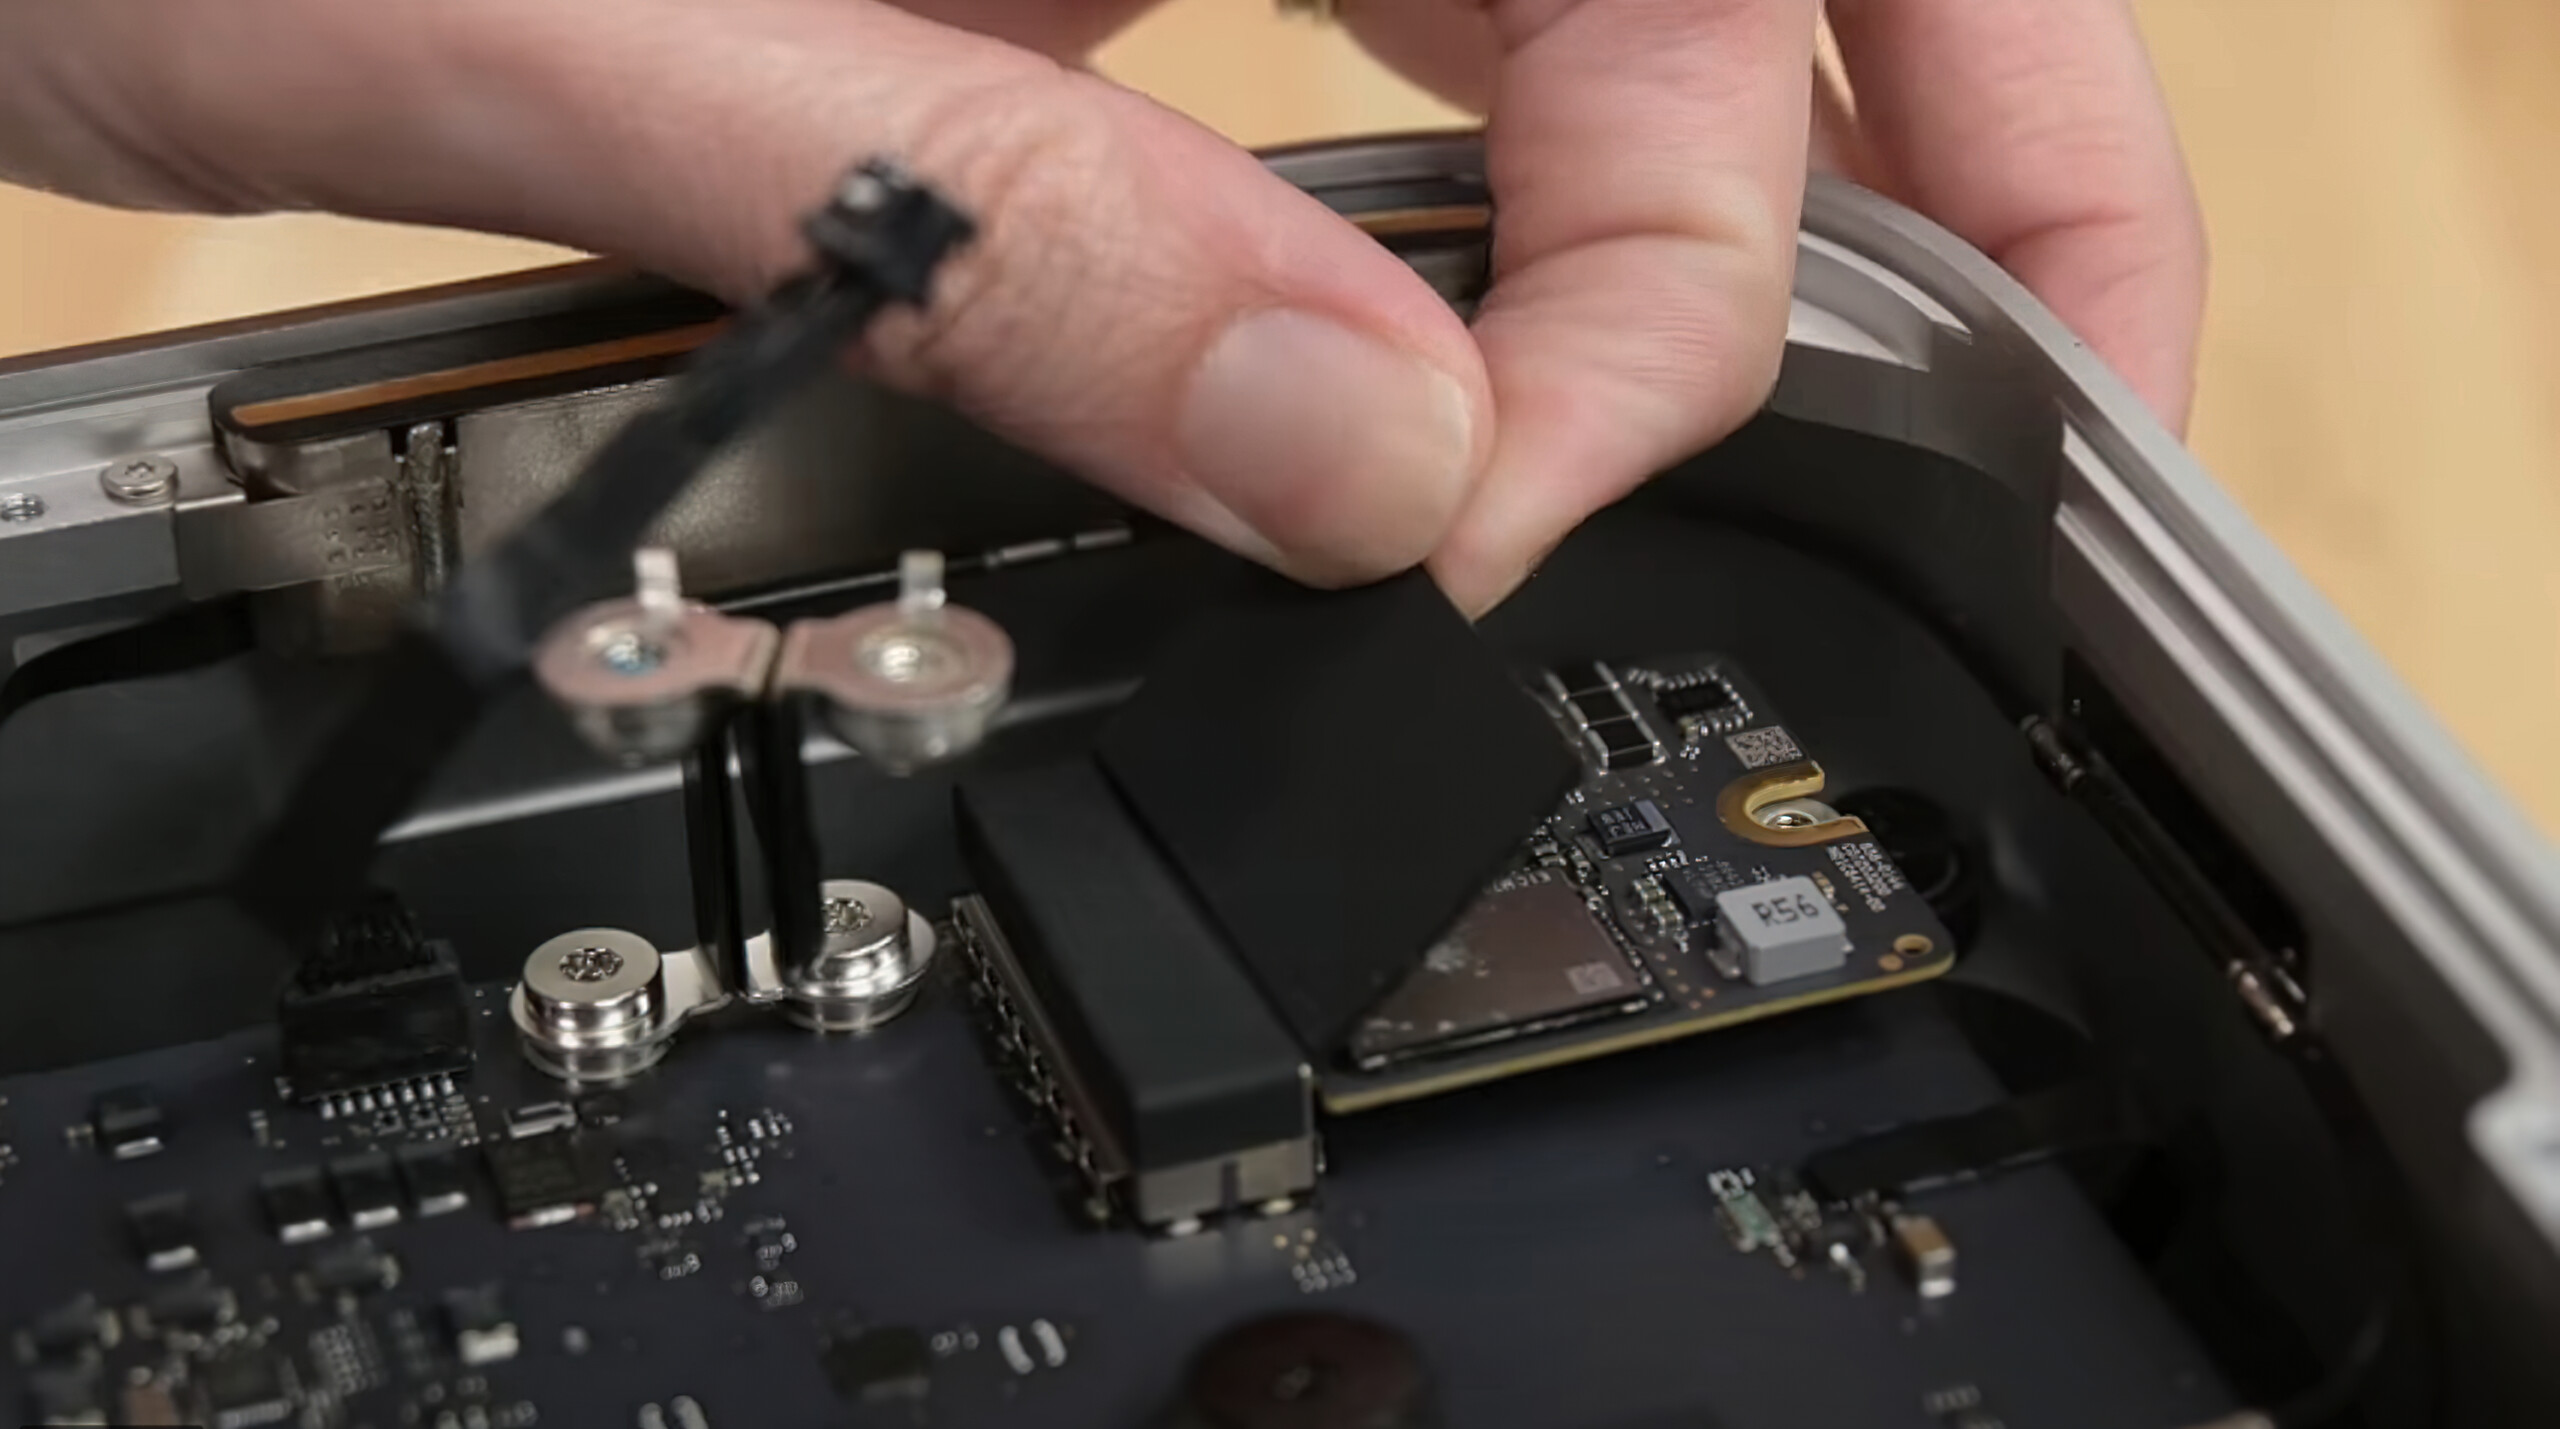 Video shows teardown of Apple's Thunderbolt 4 Pro Cable - 9to5Mac